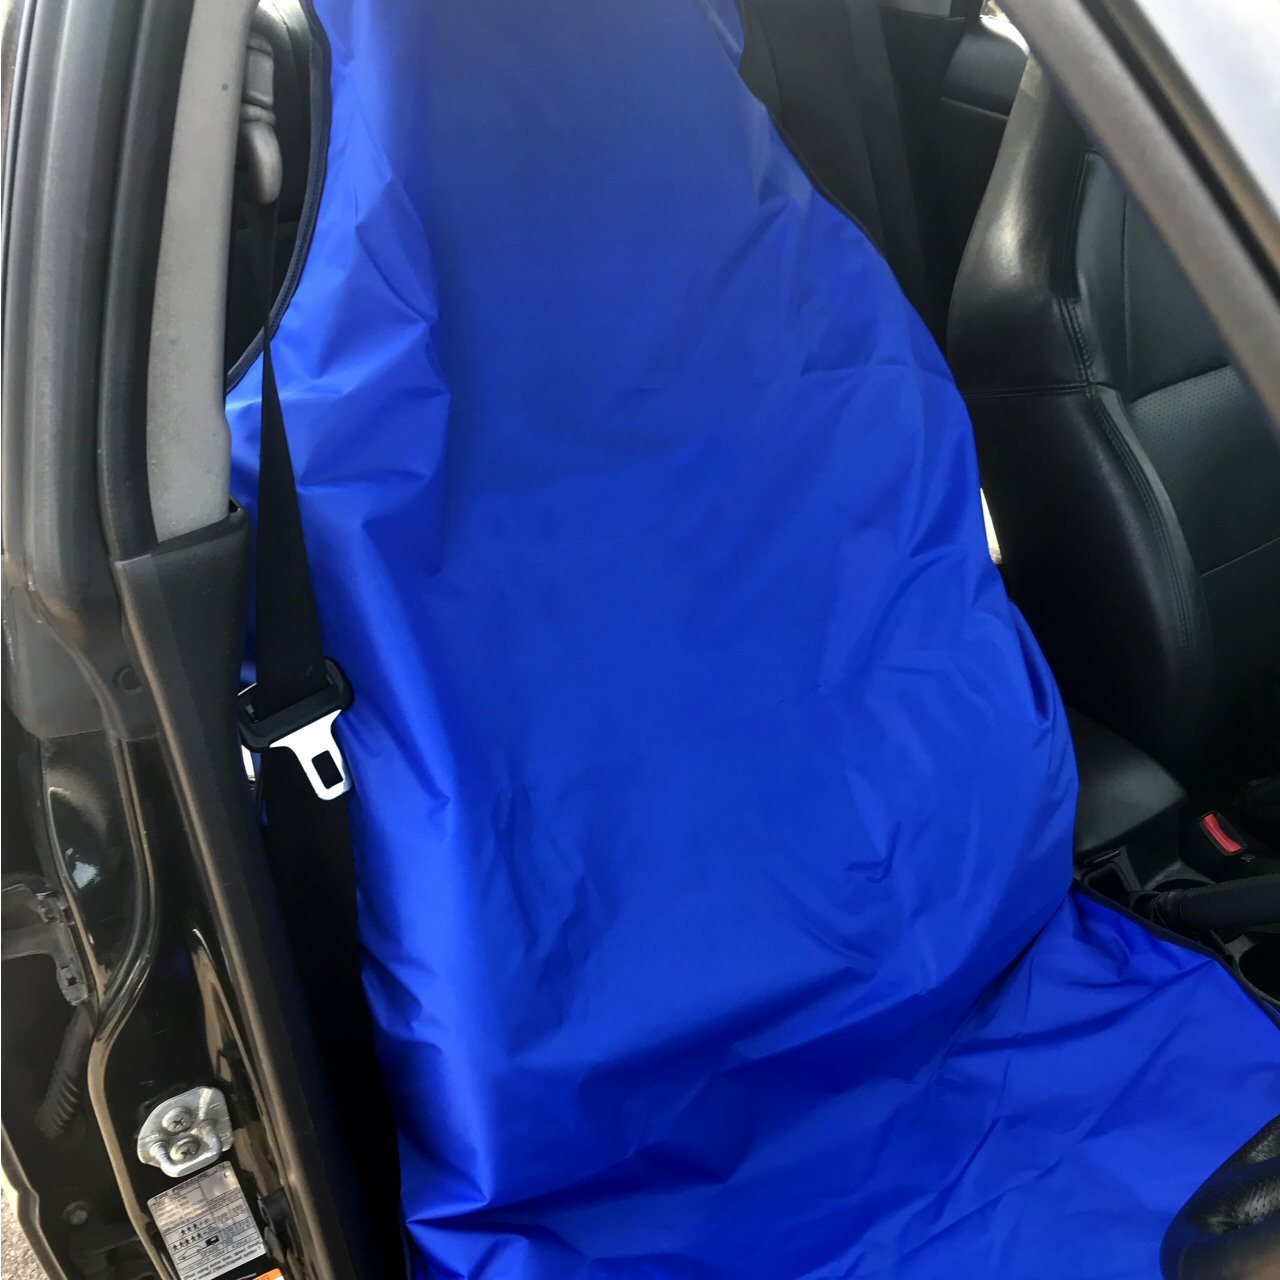 Airbag Compatible Seat Cover for Subaru Impreza, Legacy and Forester Plain Blue_1